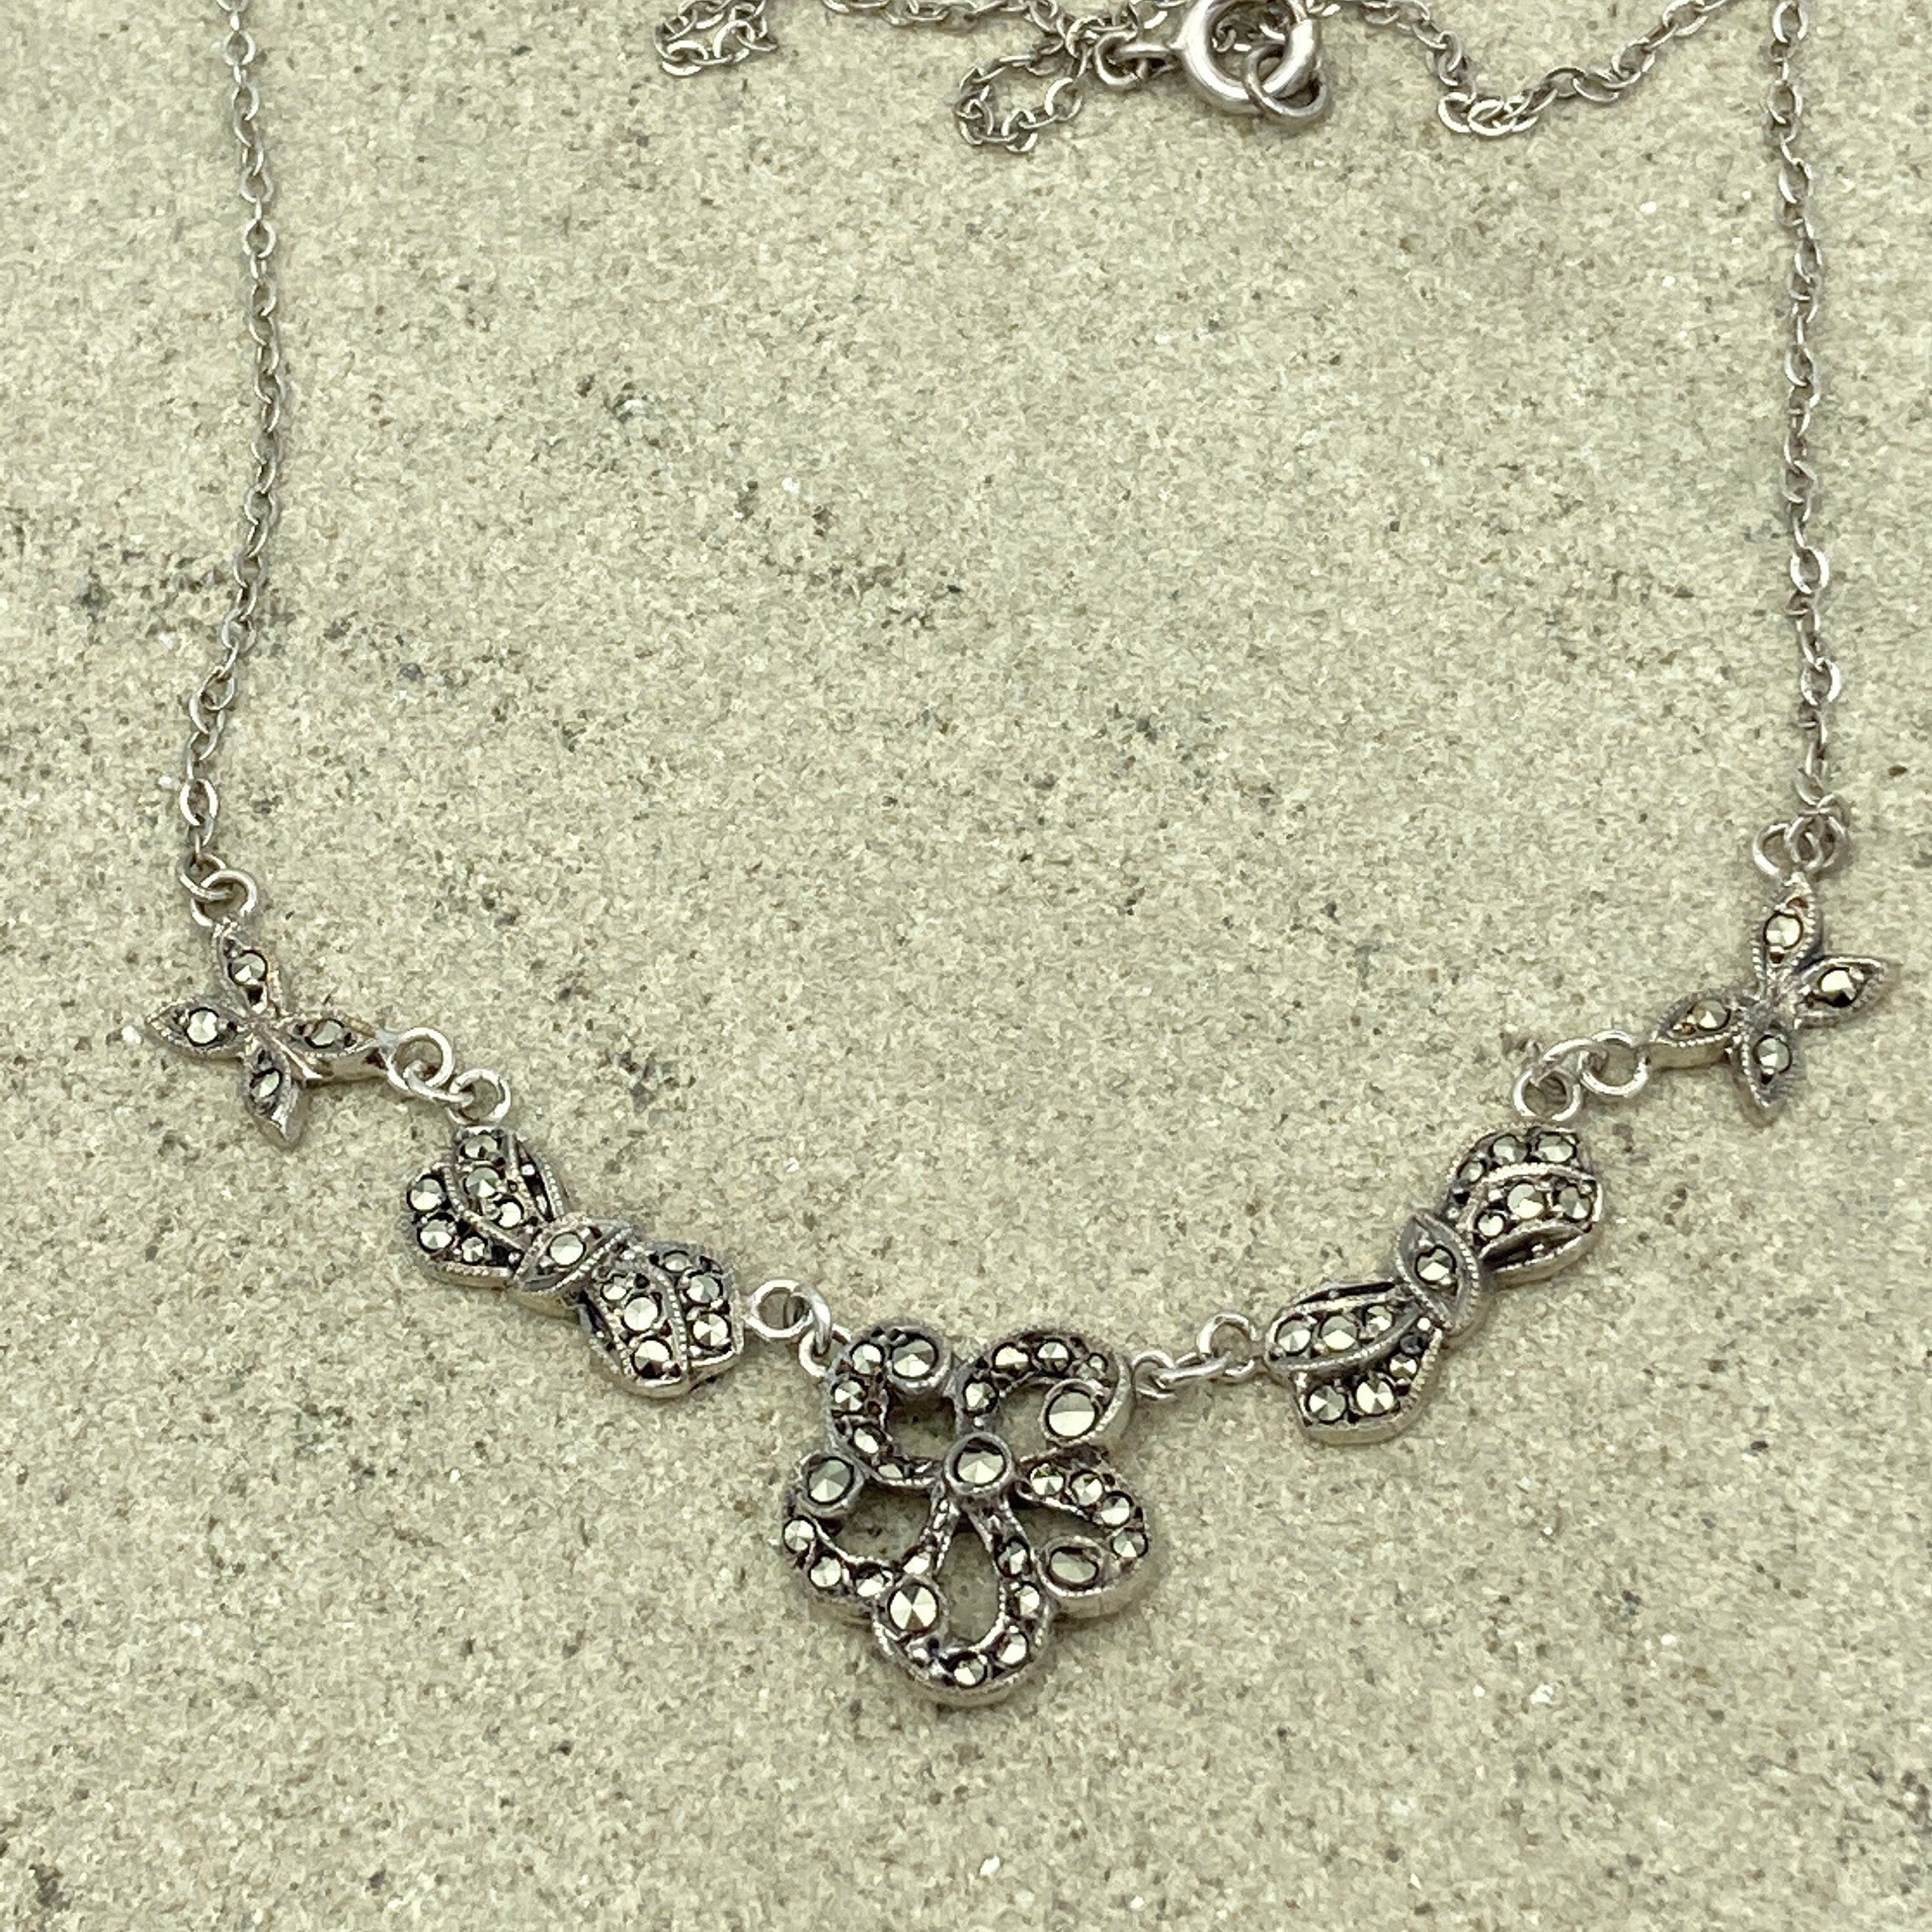 Vintage 1950s sterling silver and marcasite flower bows & butterfly necklace